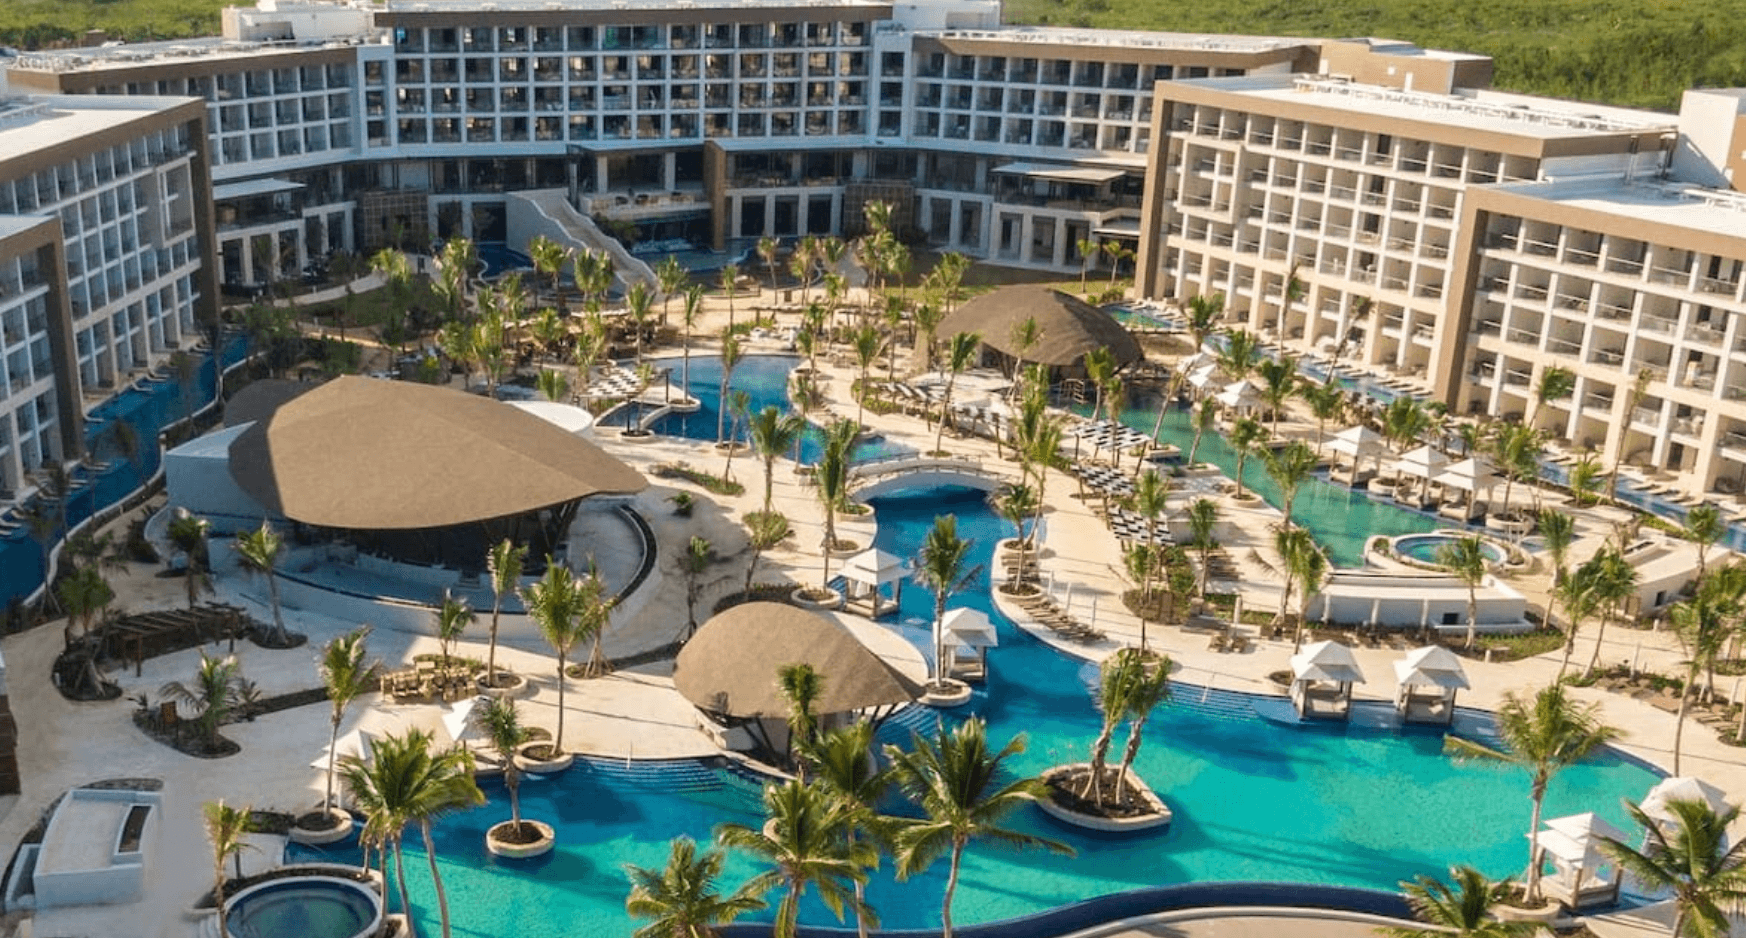 Large hotel with multiple pools